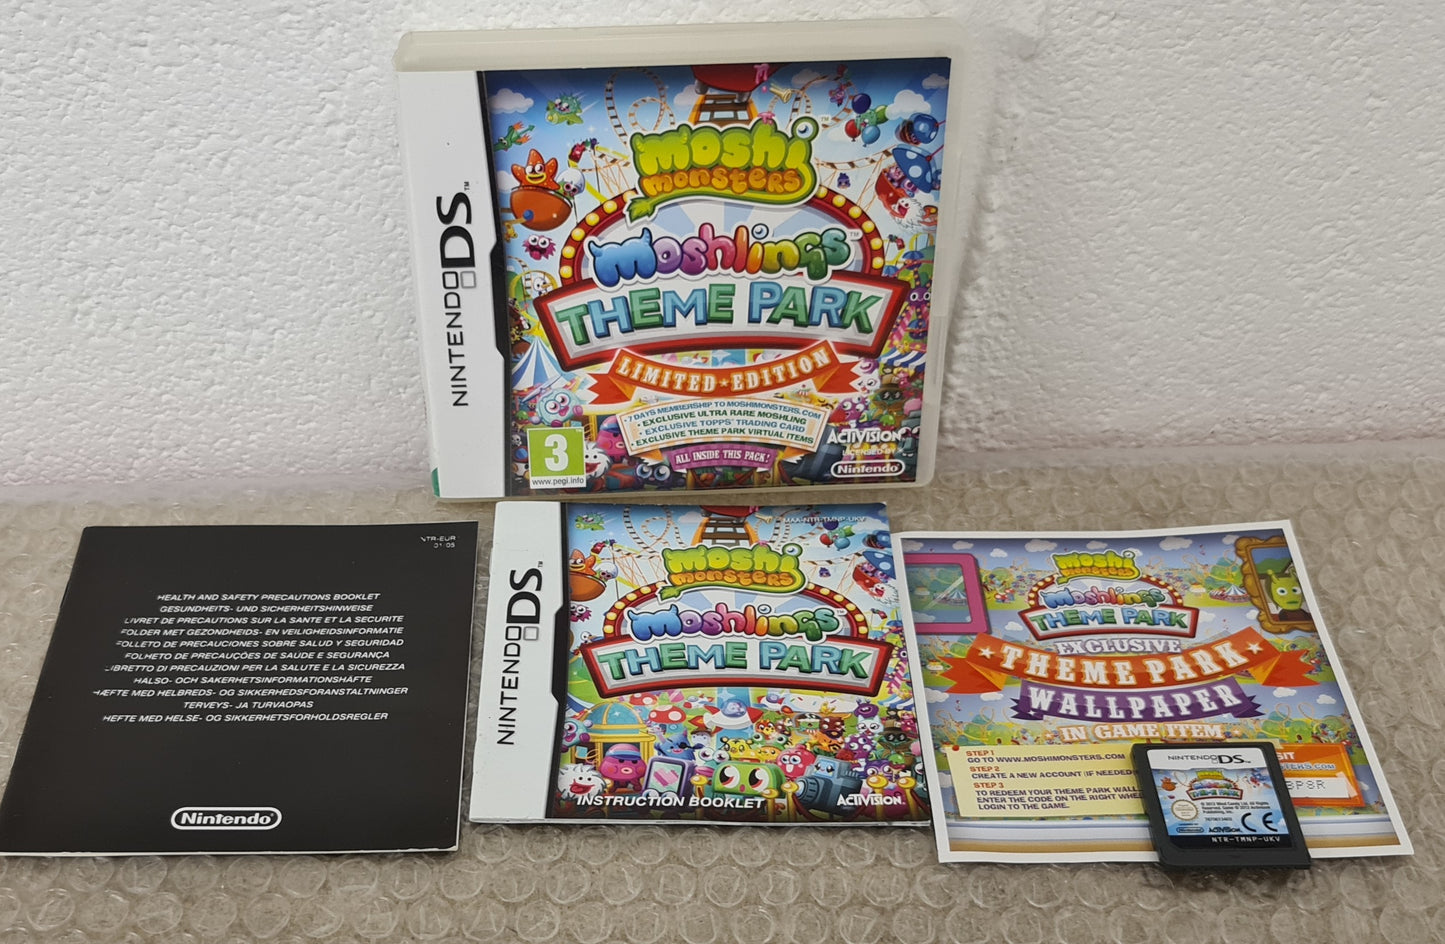 Moshi Monsters Moshlings  Theme Park Limited Edition Nintendo DS Game